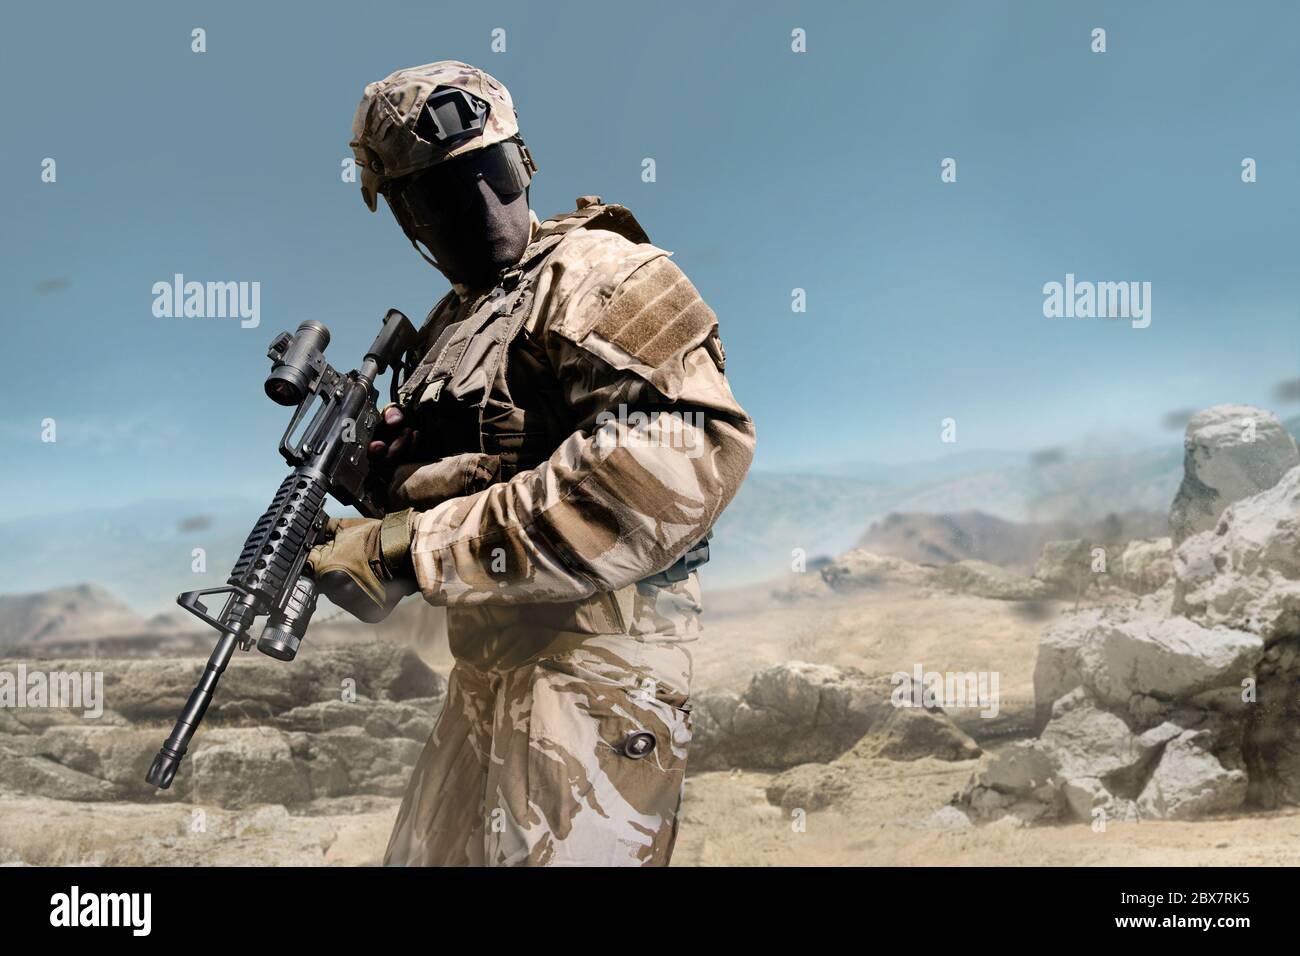 Profile View Military Fully Equipped Soldier In Outfit Posing With Rifle On Desert Background